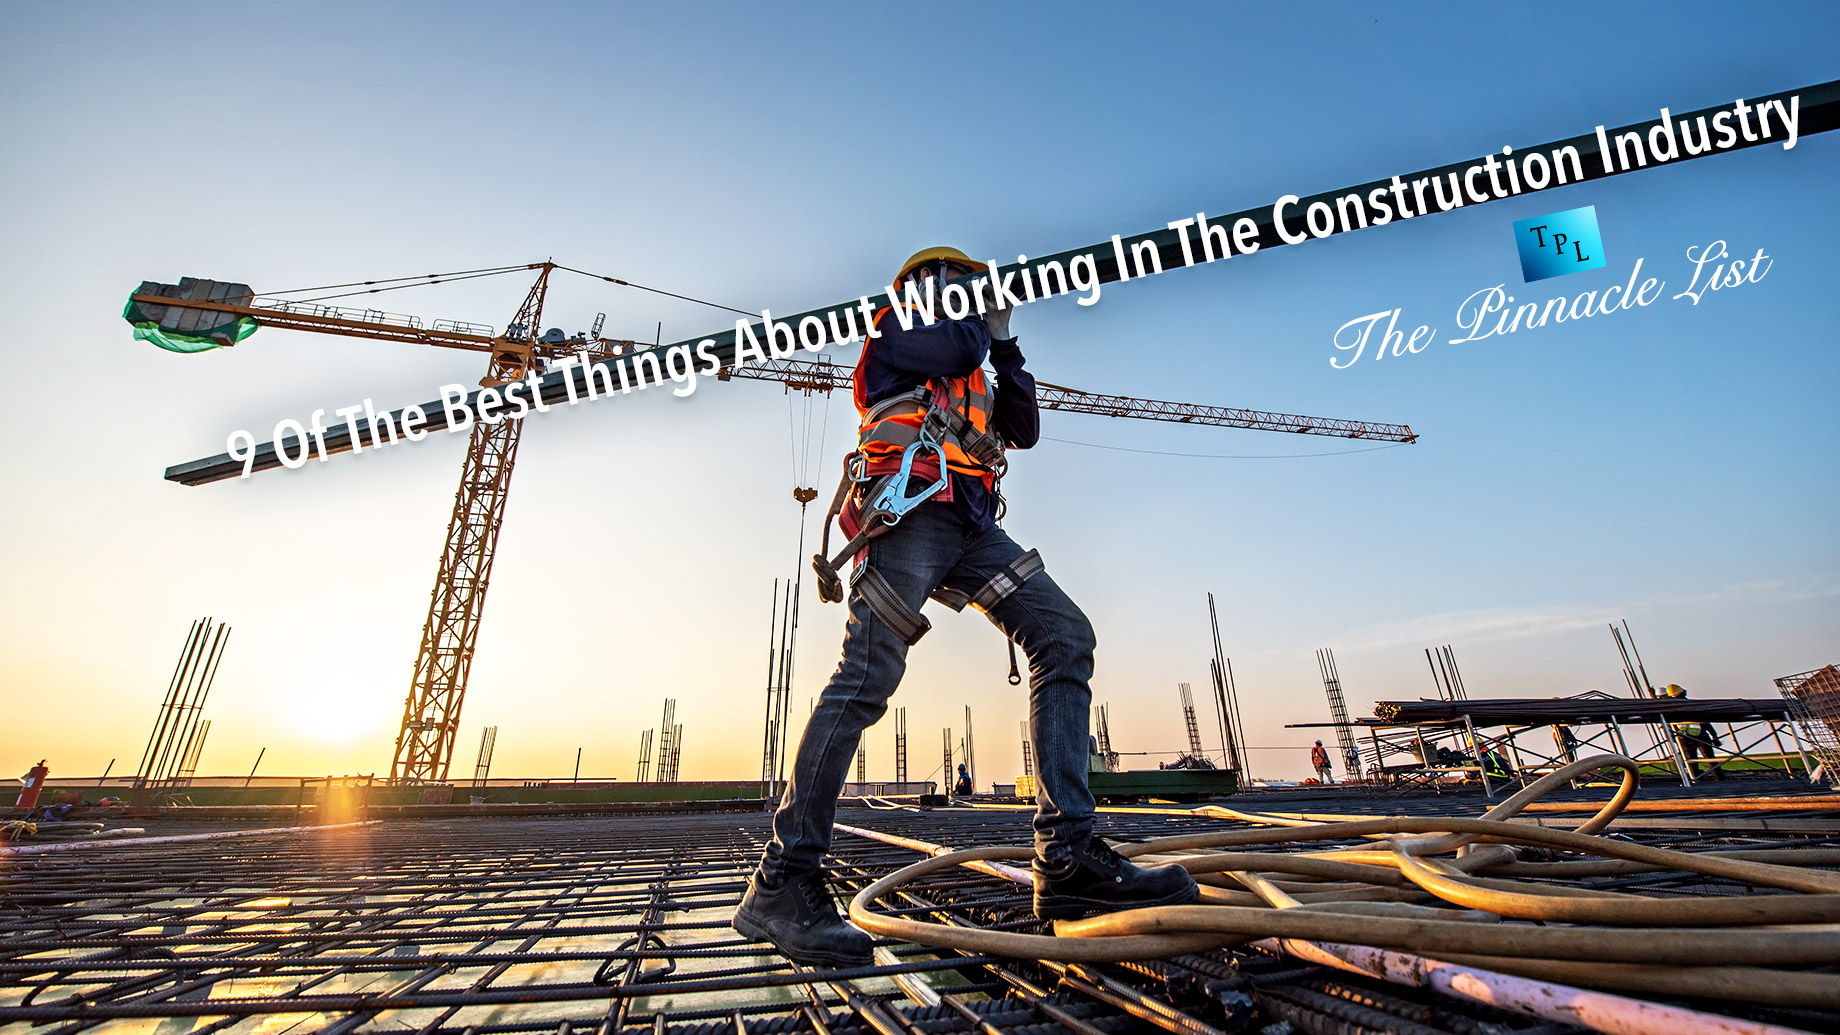 9 Of The Best Things About Working In The Construction Industry